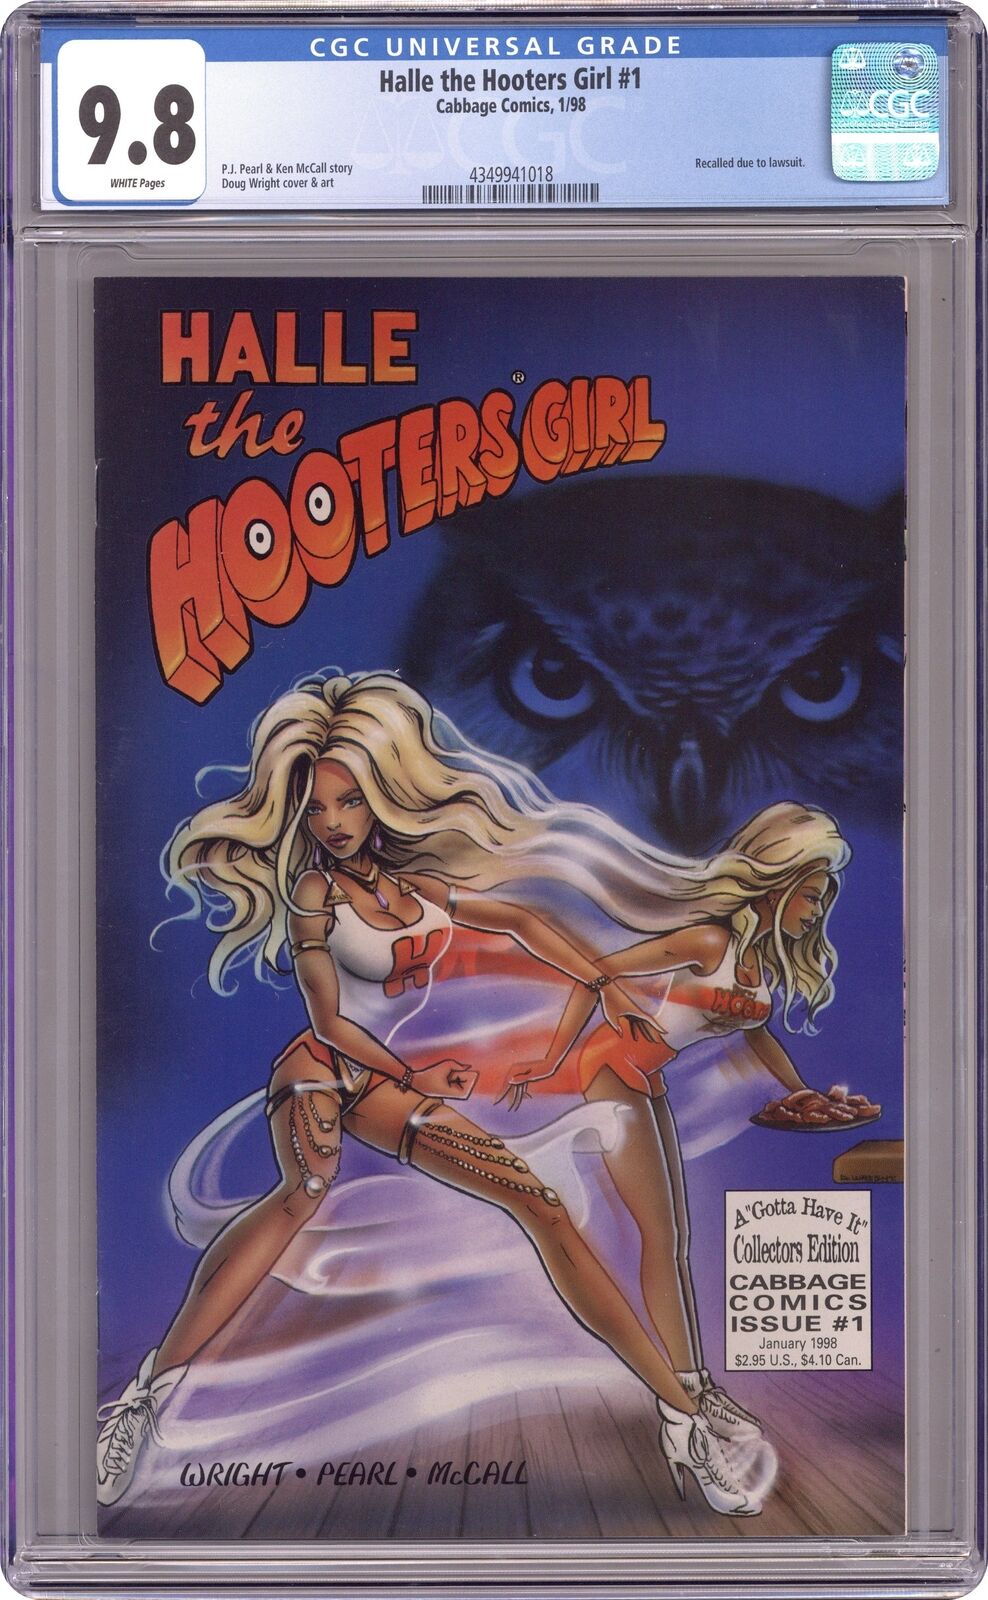 Halle the Hooters Girl 1A CGC 9.8 1998 4349941018